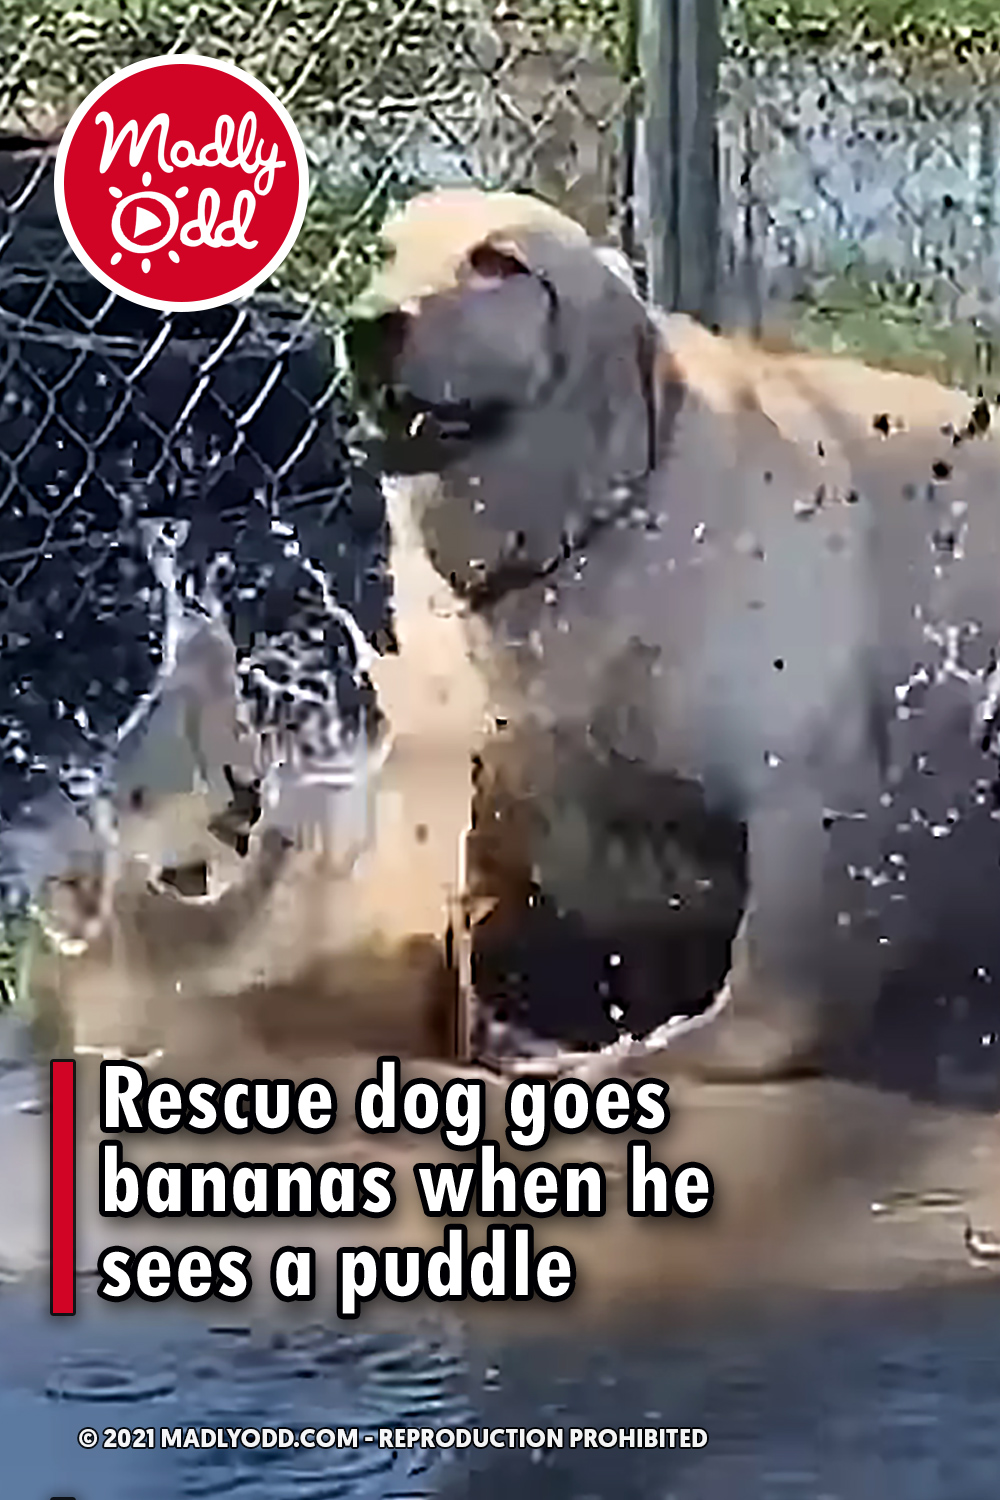 Rescue dog goes bananas when he sees a puddle